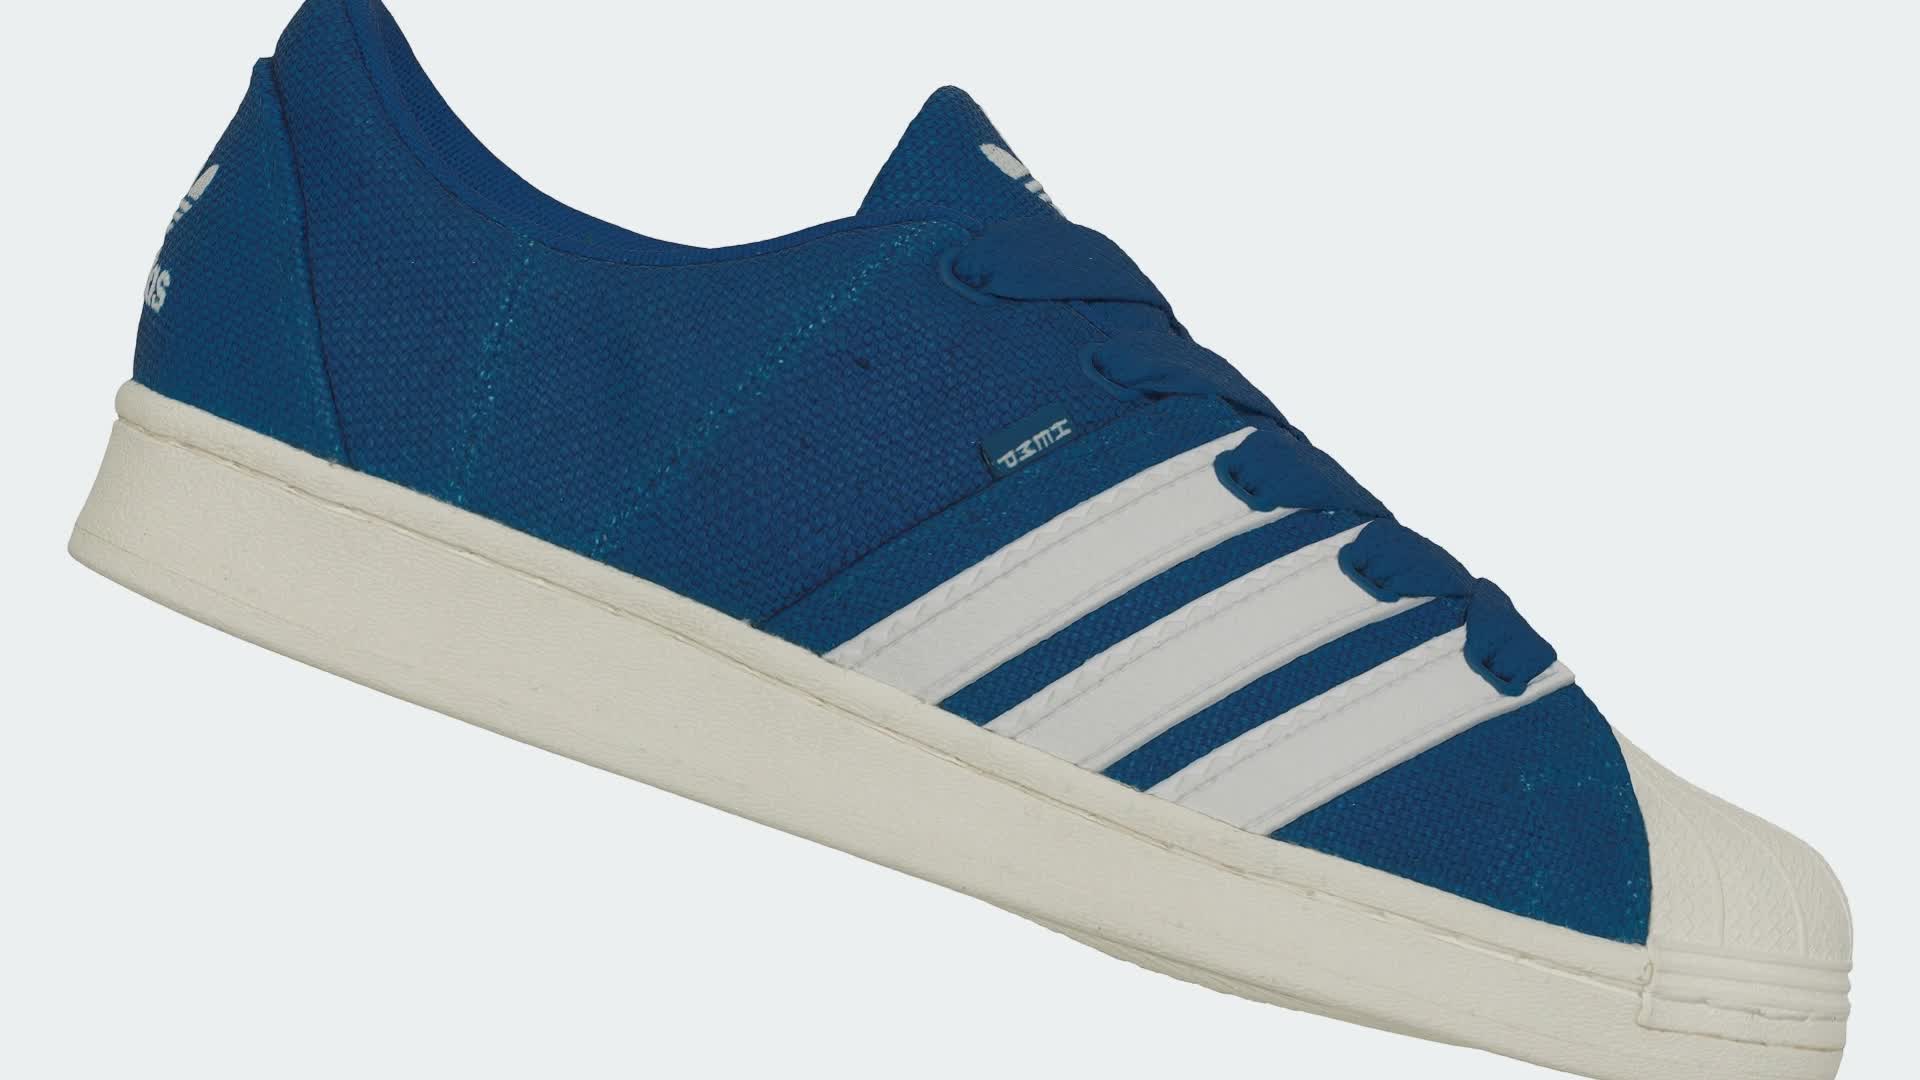 adidas Superstar Supermodified Shoes | Men's Lifestyle | adidas US